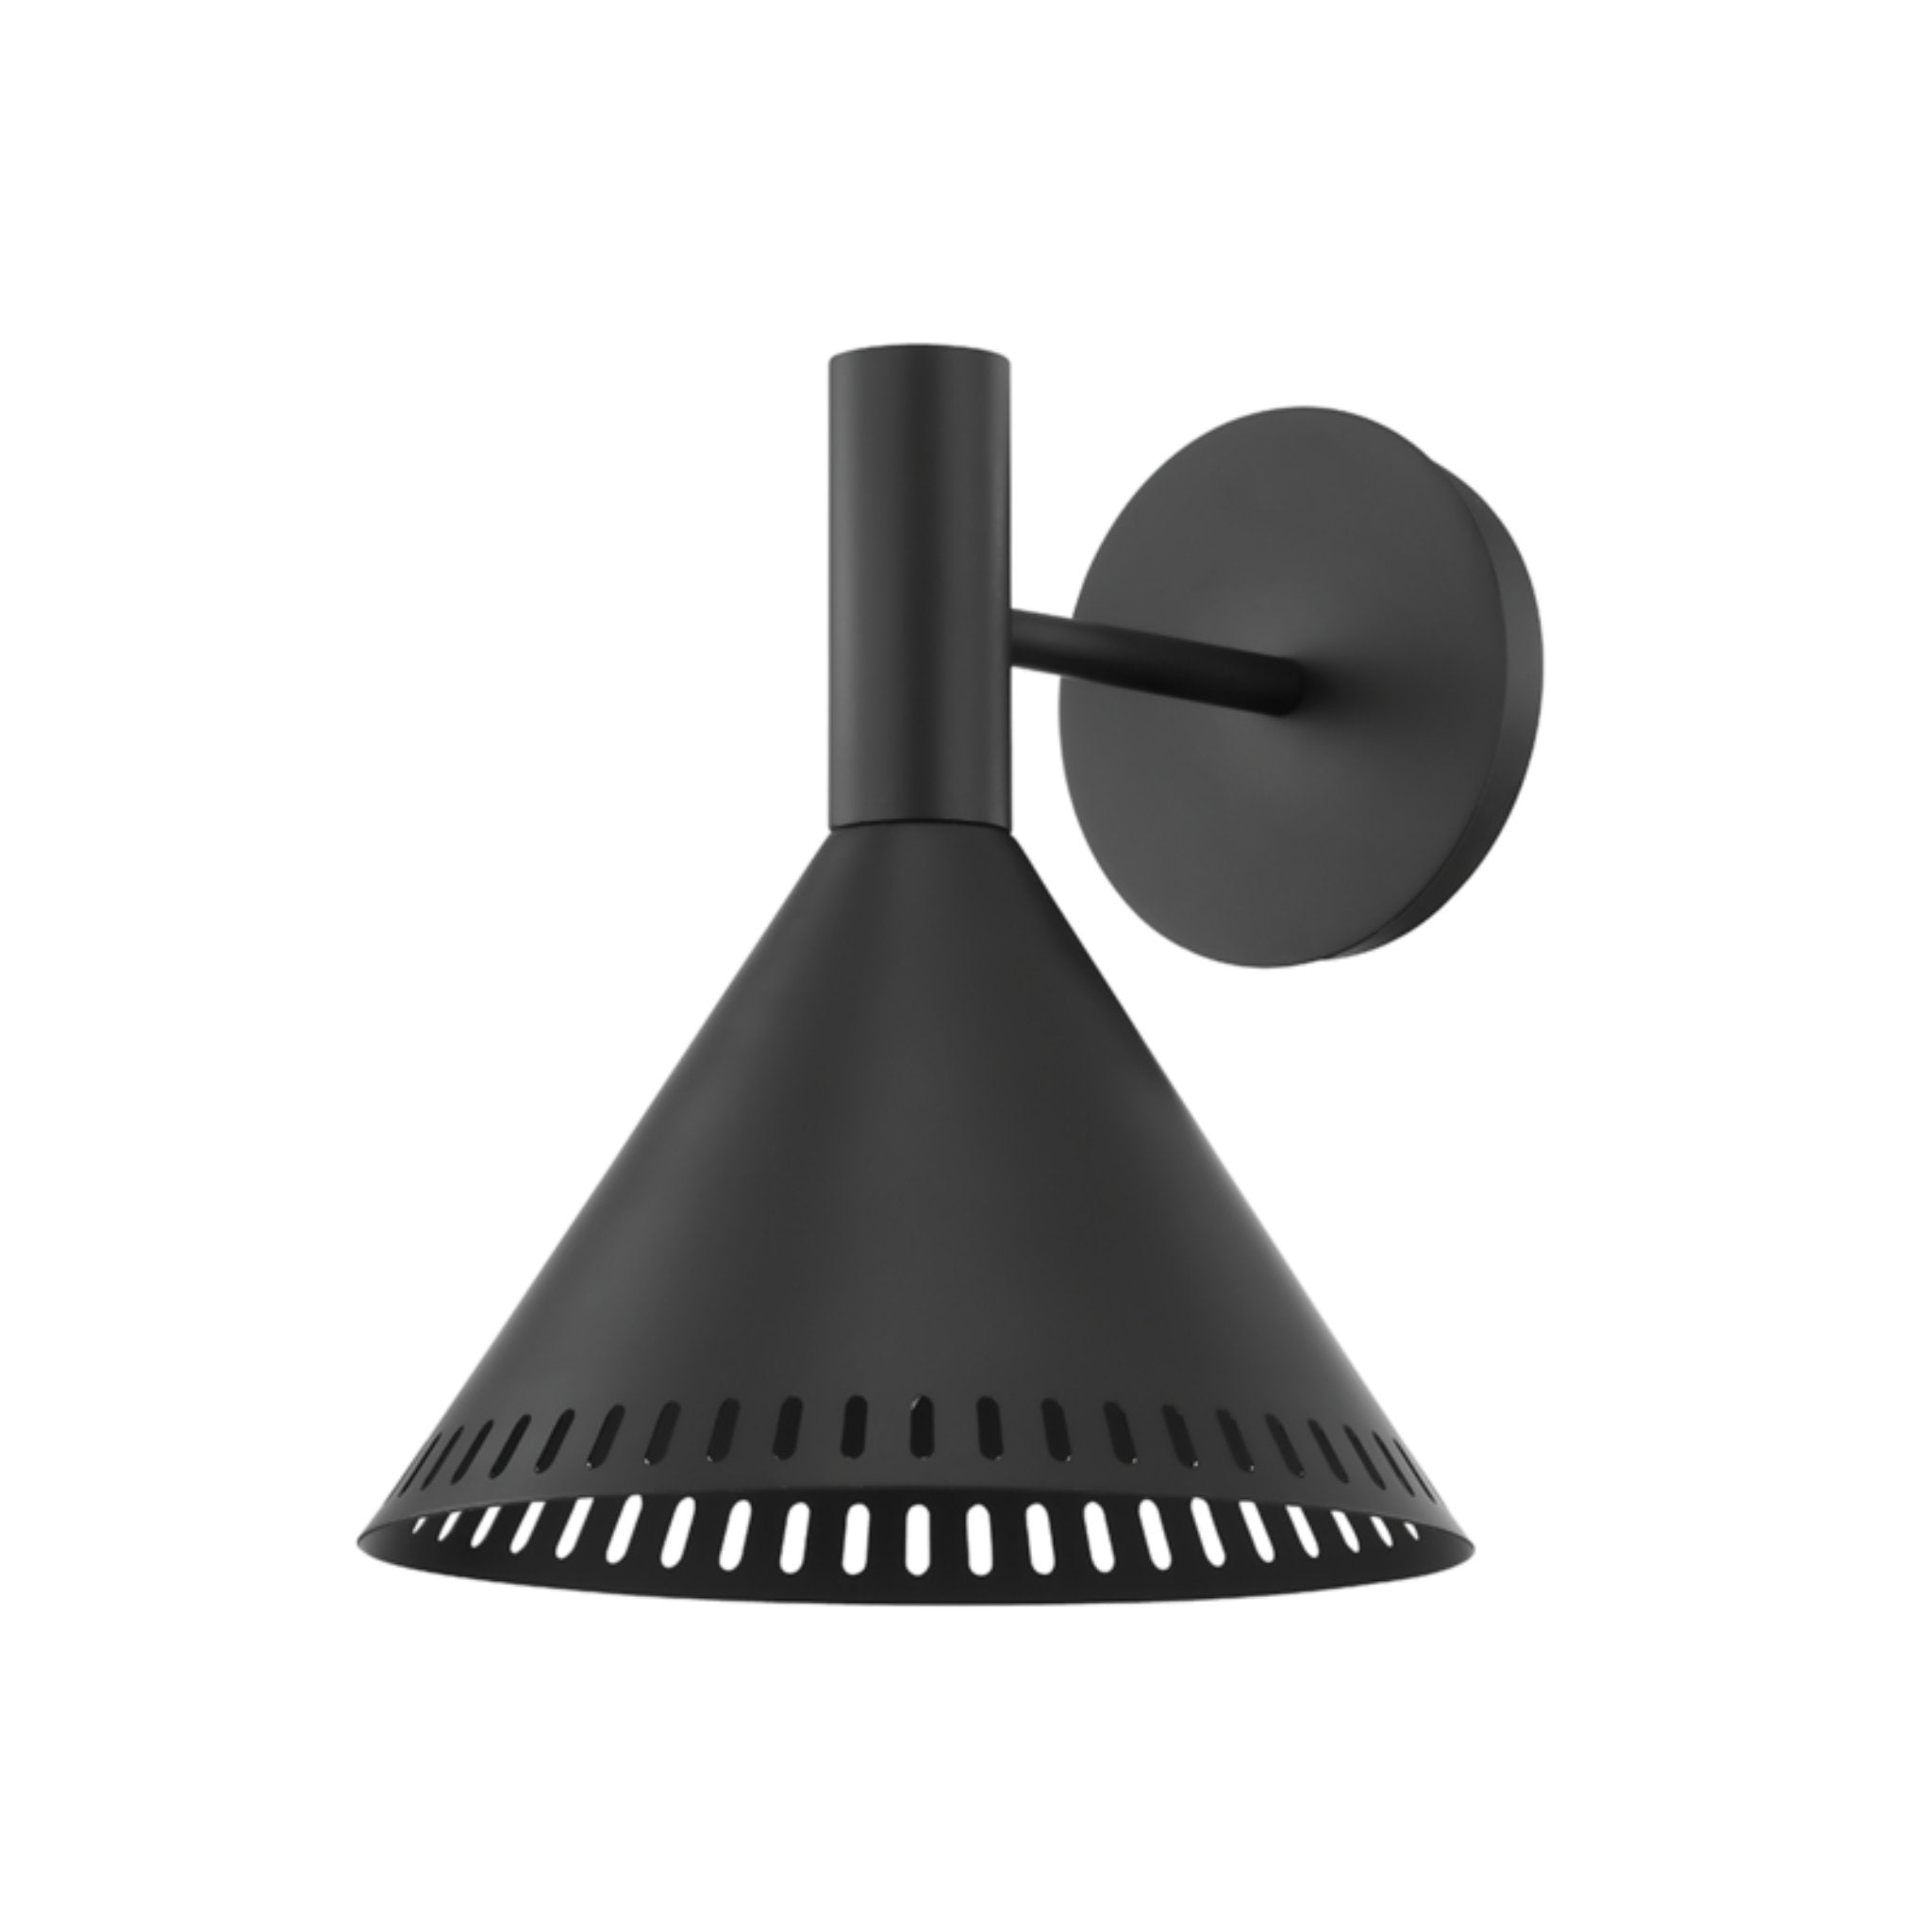 Atticus 1 Light Wall Sconce in Soft Black